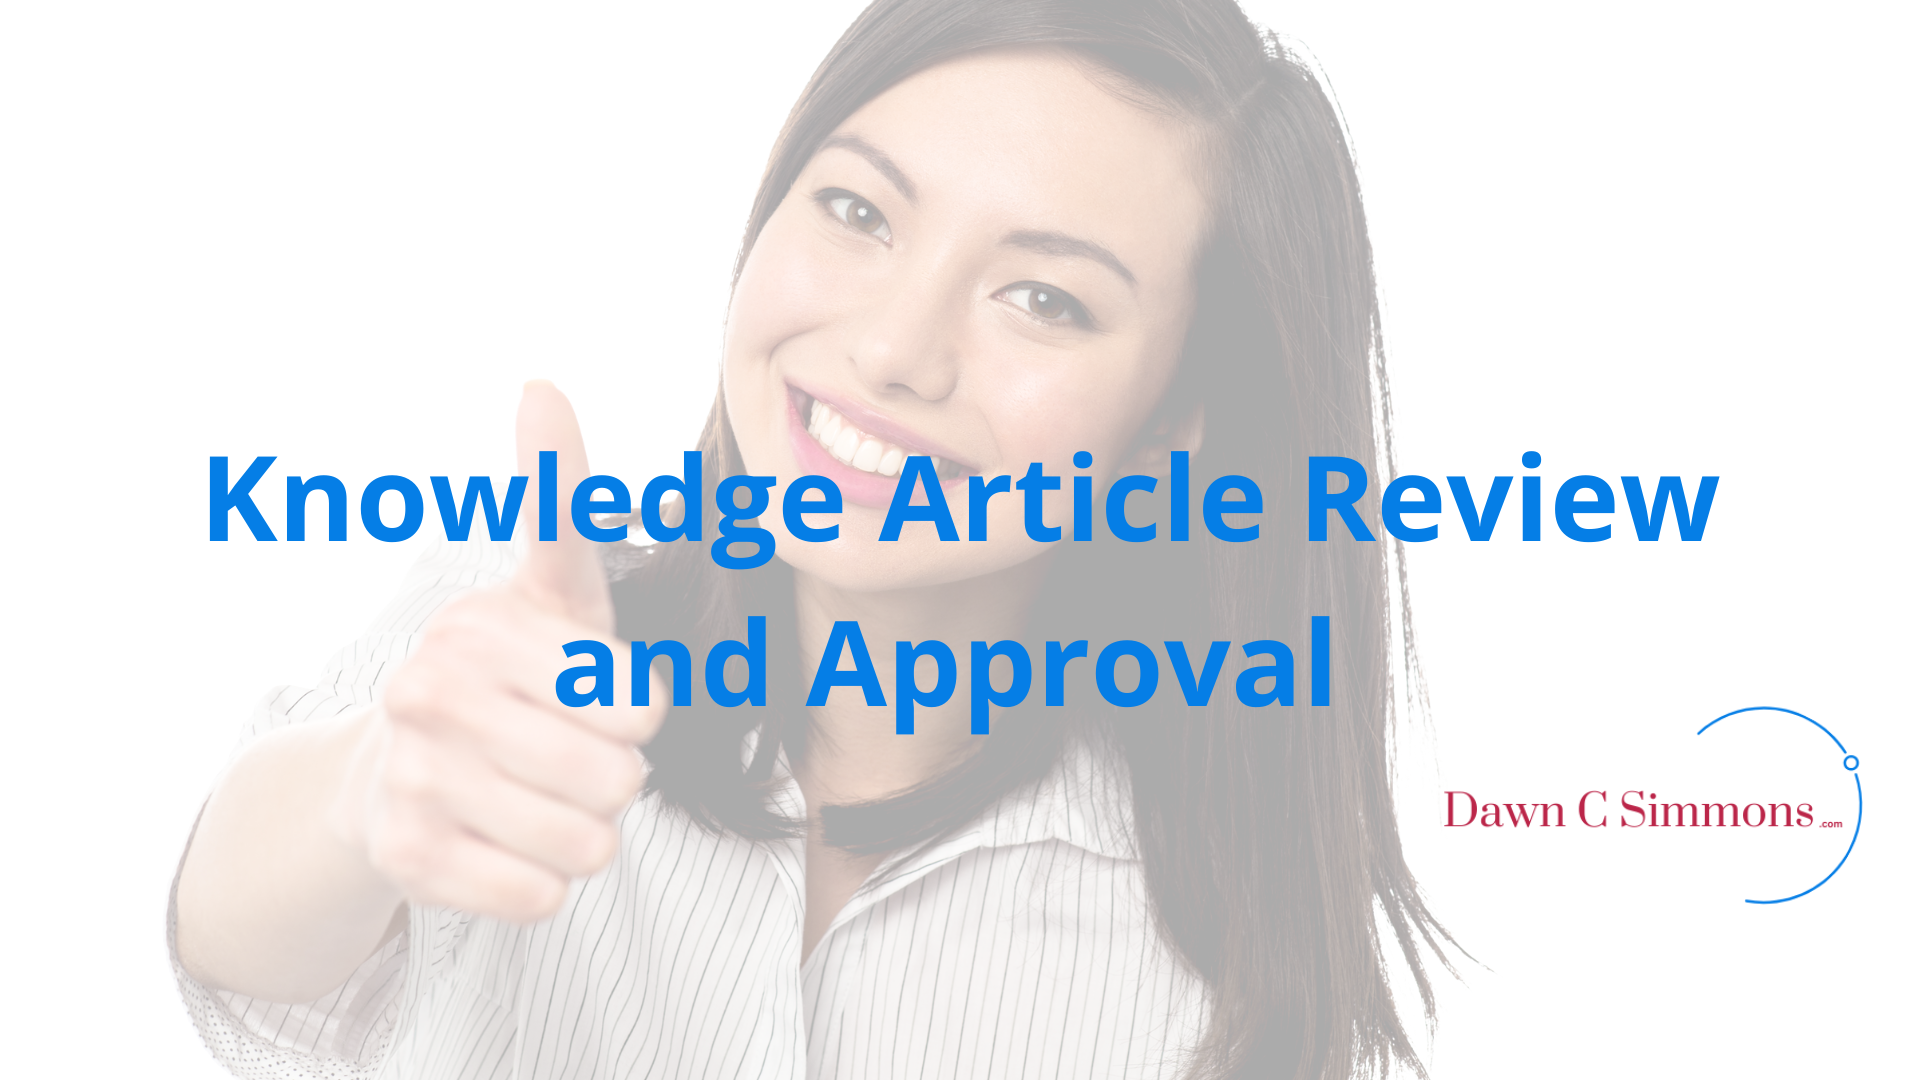 Review and Approve Knowledge